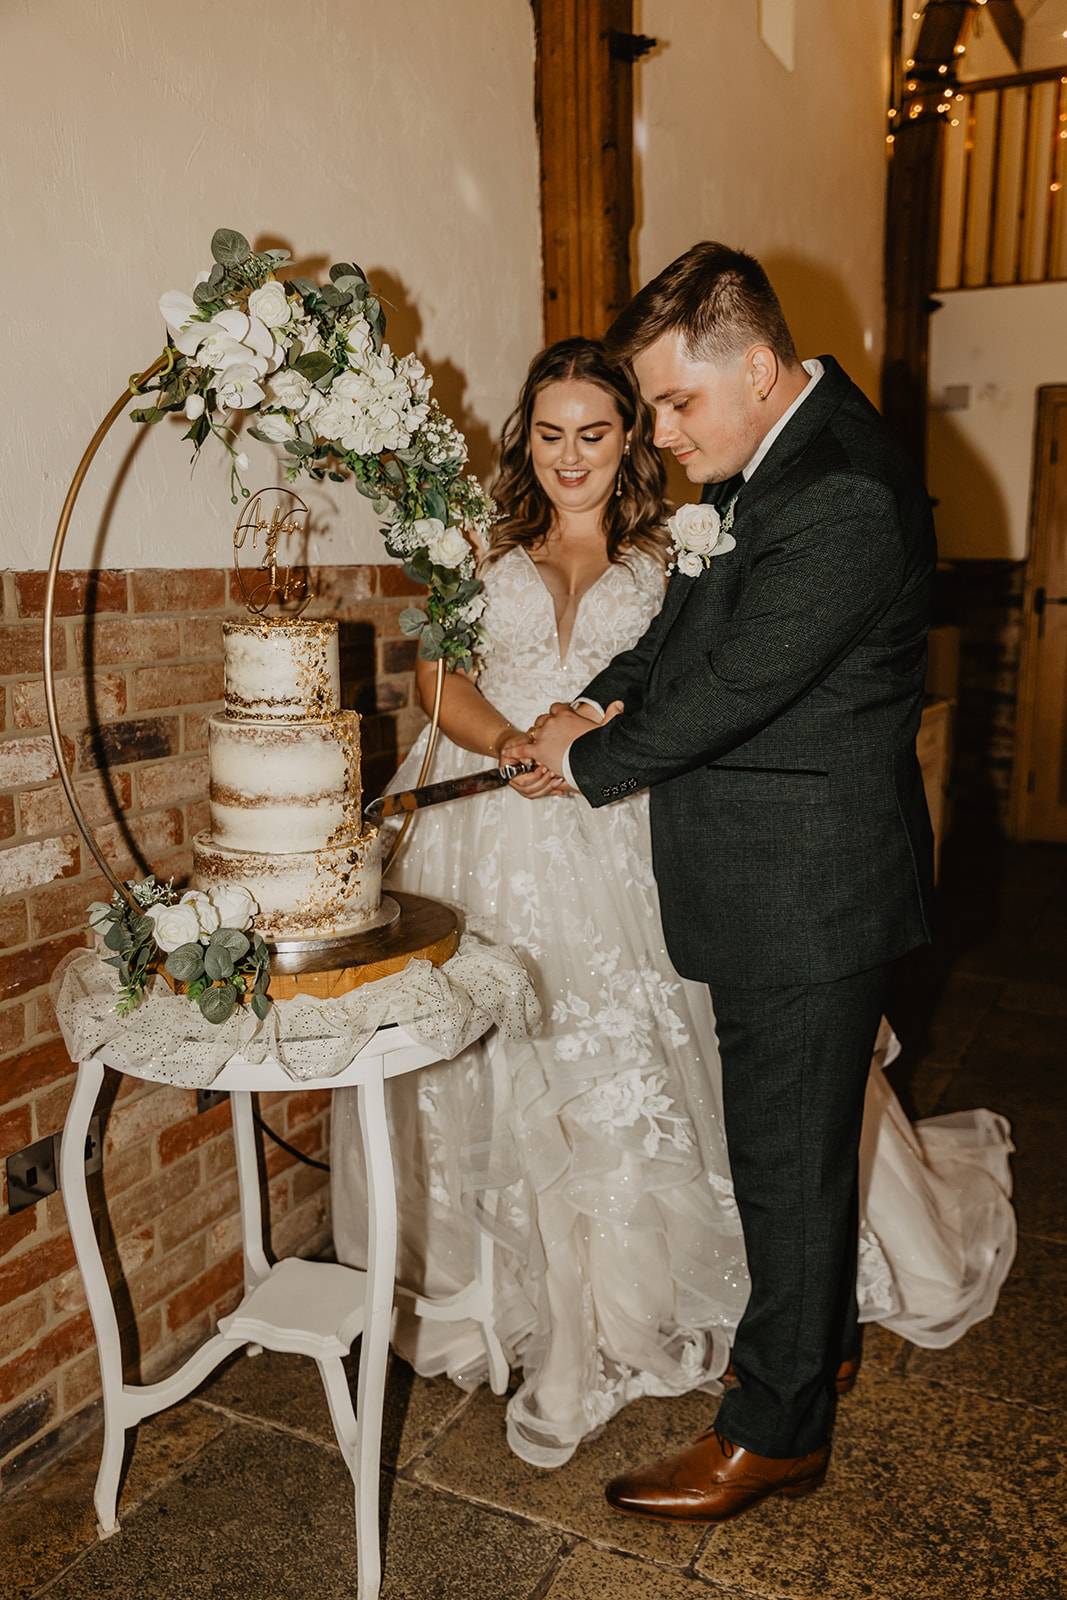 Bride and Groom cut their cake at a Long Furlong Barn Wedding in Worthing, Sussex. By Olive Joy Photography.